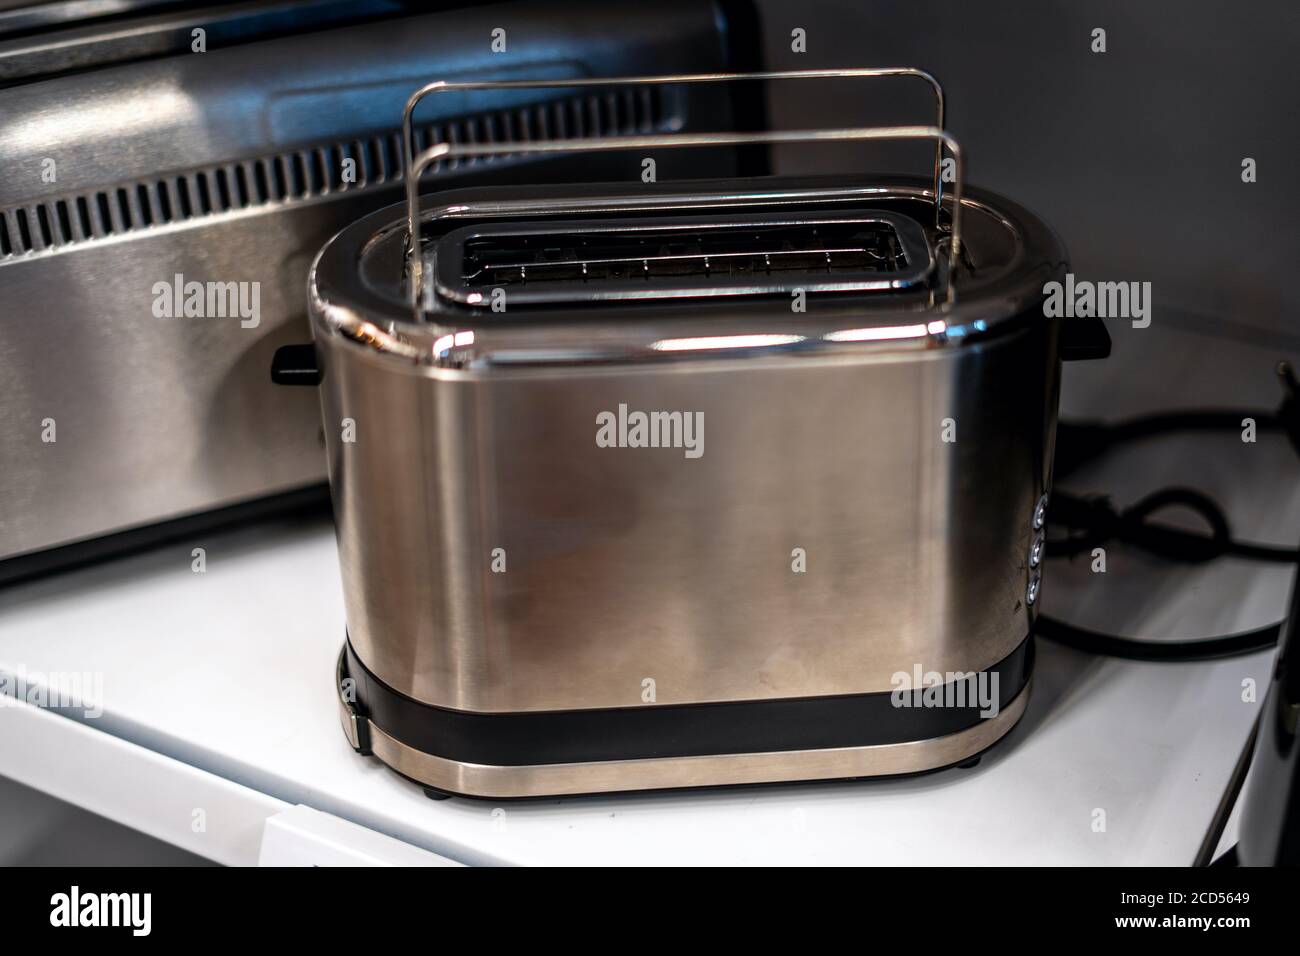 https://c8.alamy.com/comp/2CD5649/studio-shot-toasters-two-slice-stainless-steel-toaster-oven-grey-metal-electric-domestic-kitchen-appliances-selective-focus-2CD5649.jpg